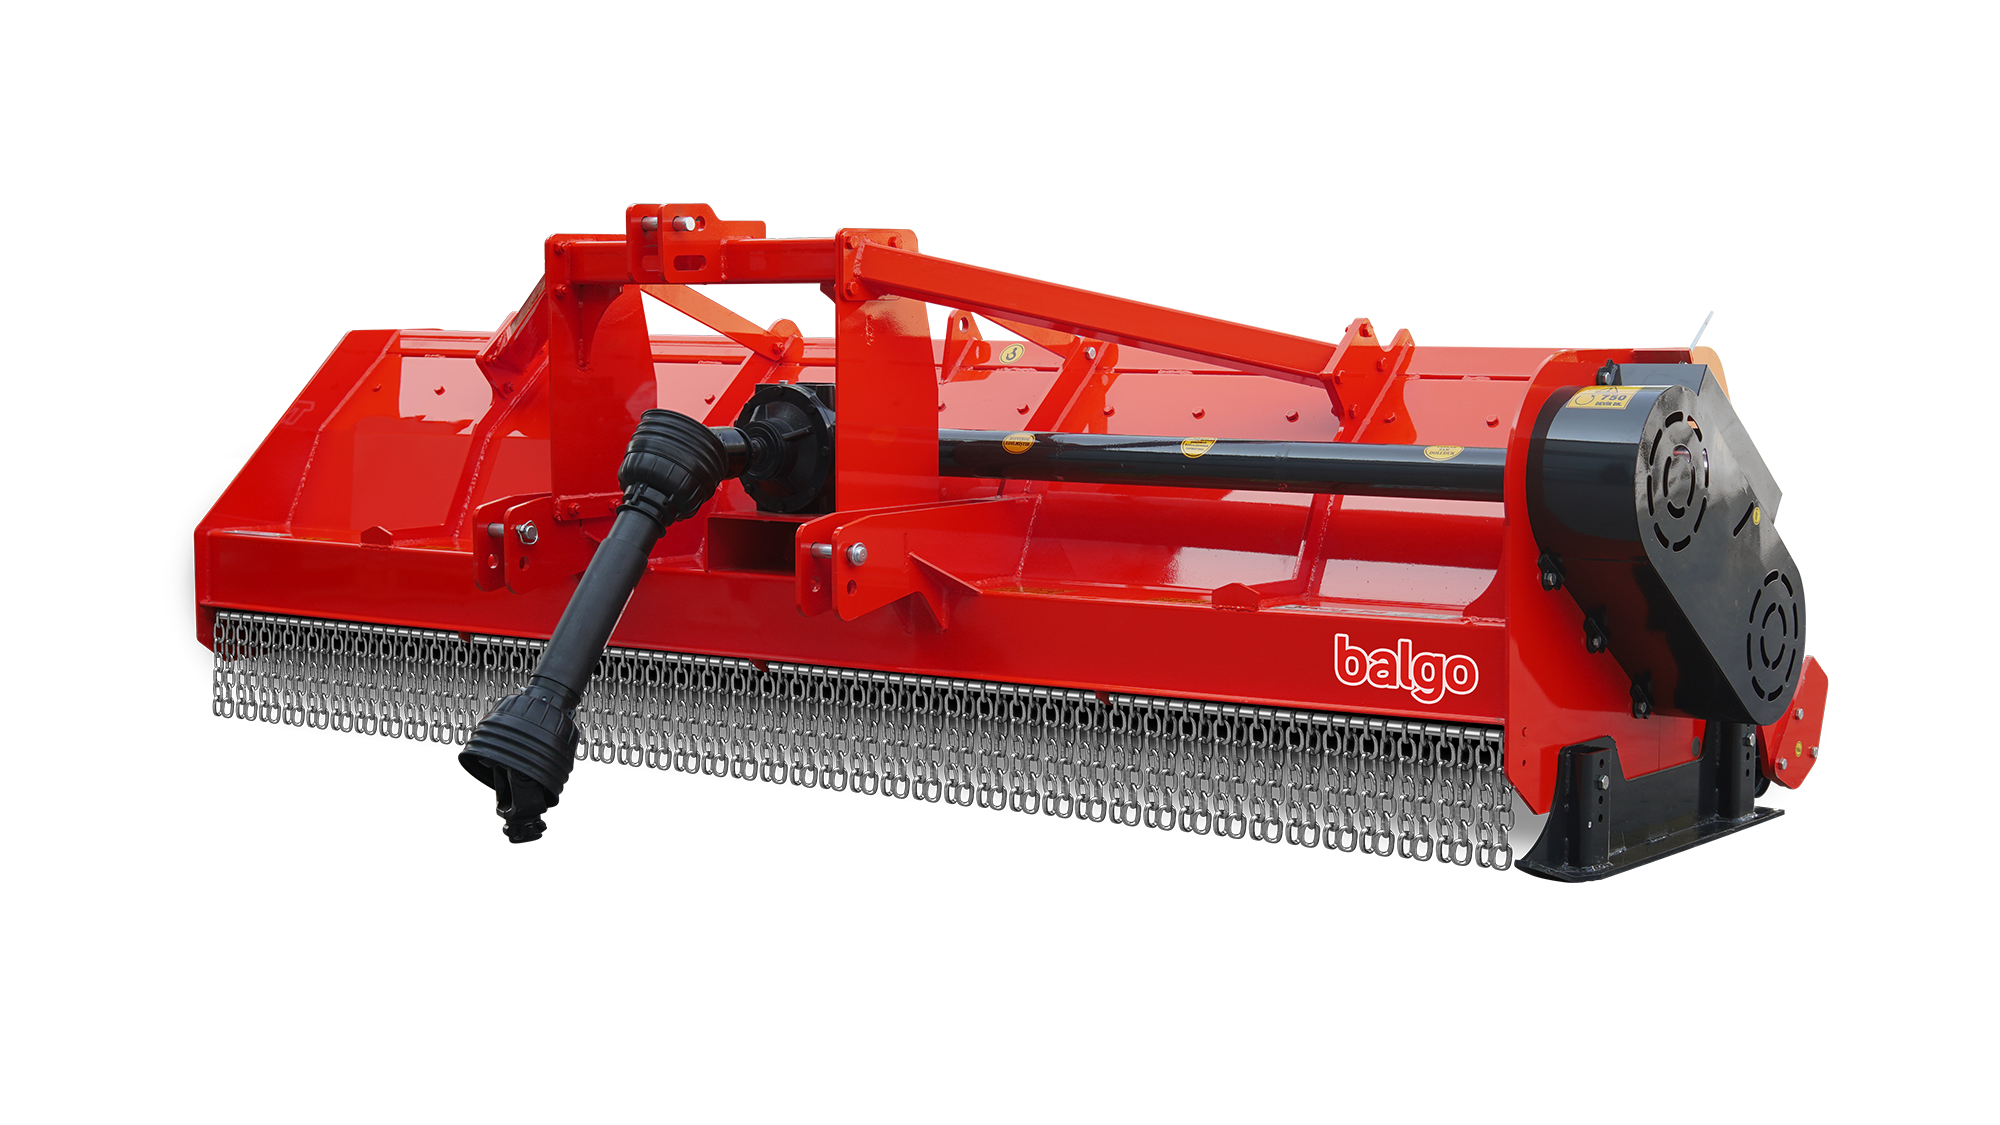  || Balgo Agricultural Machinery | Rotary Tiller, Variable Speed Rotary Tiller, Power Harrow, Agricultural Machinery Rotary Tiller, Garden Type Rotary Tiller, Garden Type Mini Rotary Tiller, Garden Type Mechanical Rotary Tiller, Garden Type Hydraulic Rotary Tiller, Field Type Rotary Tiller, Side Movement Mulcher, Hydraulic Mulcher, Double Sided Mulcher, Balgo Agricultural Machinery, Mulchers, Balgo Agricultural Machinery Inter Row Cultivator, Inter Row Cultivator, Flail Mower  Agricultural Machinery